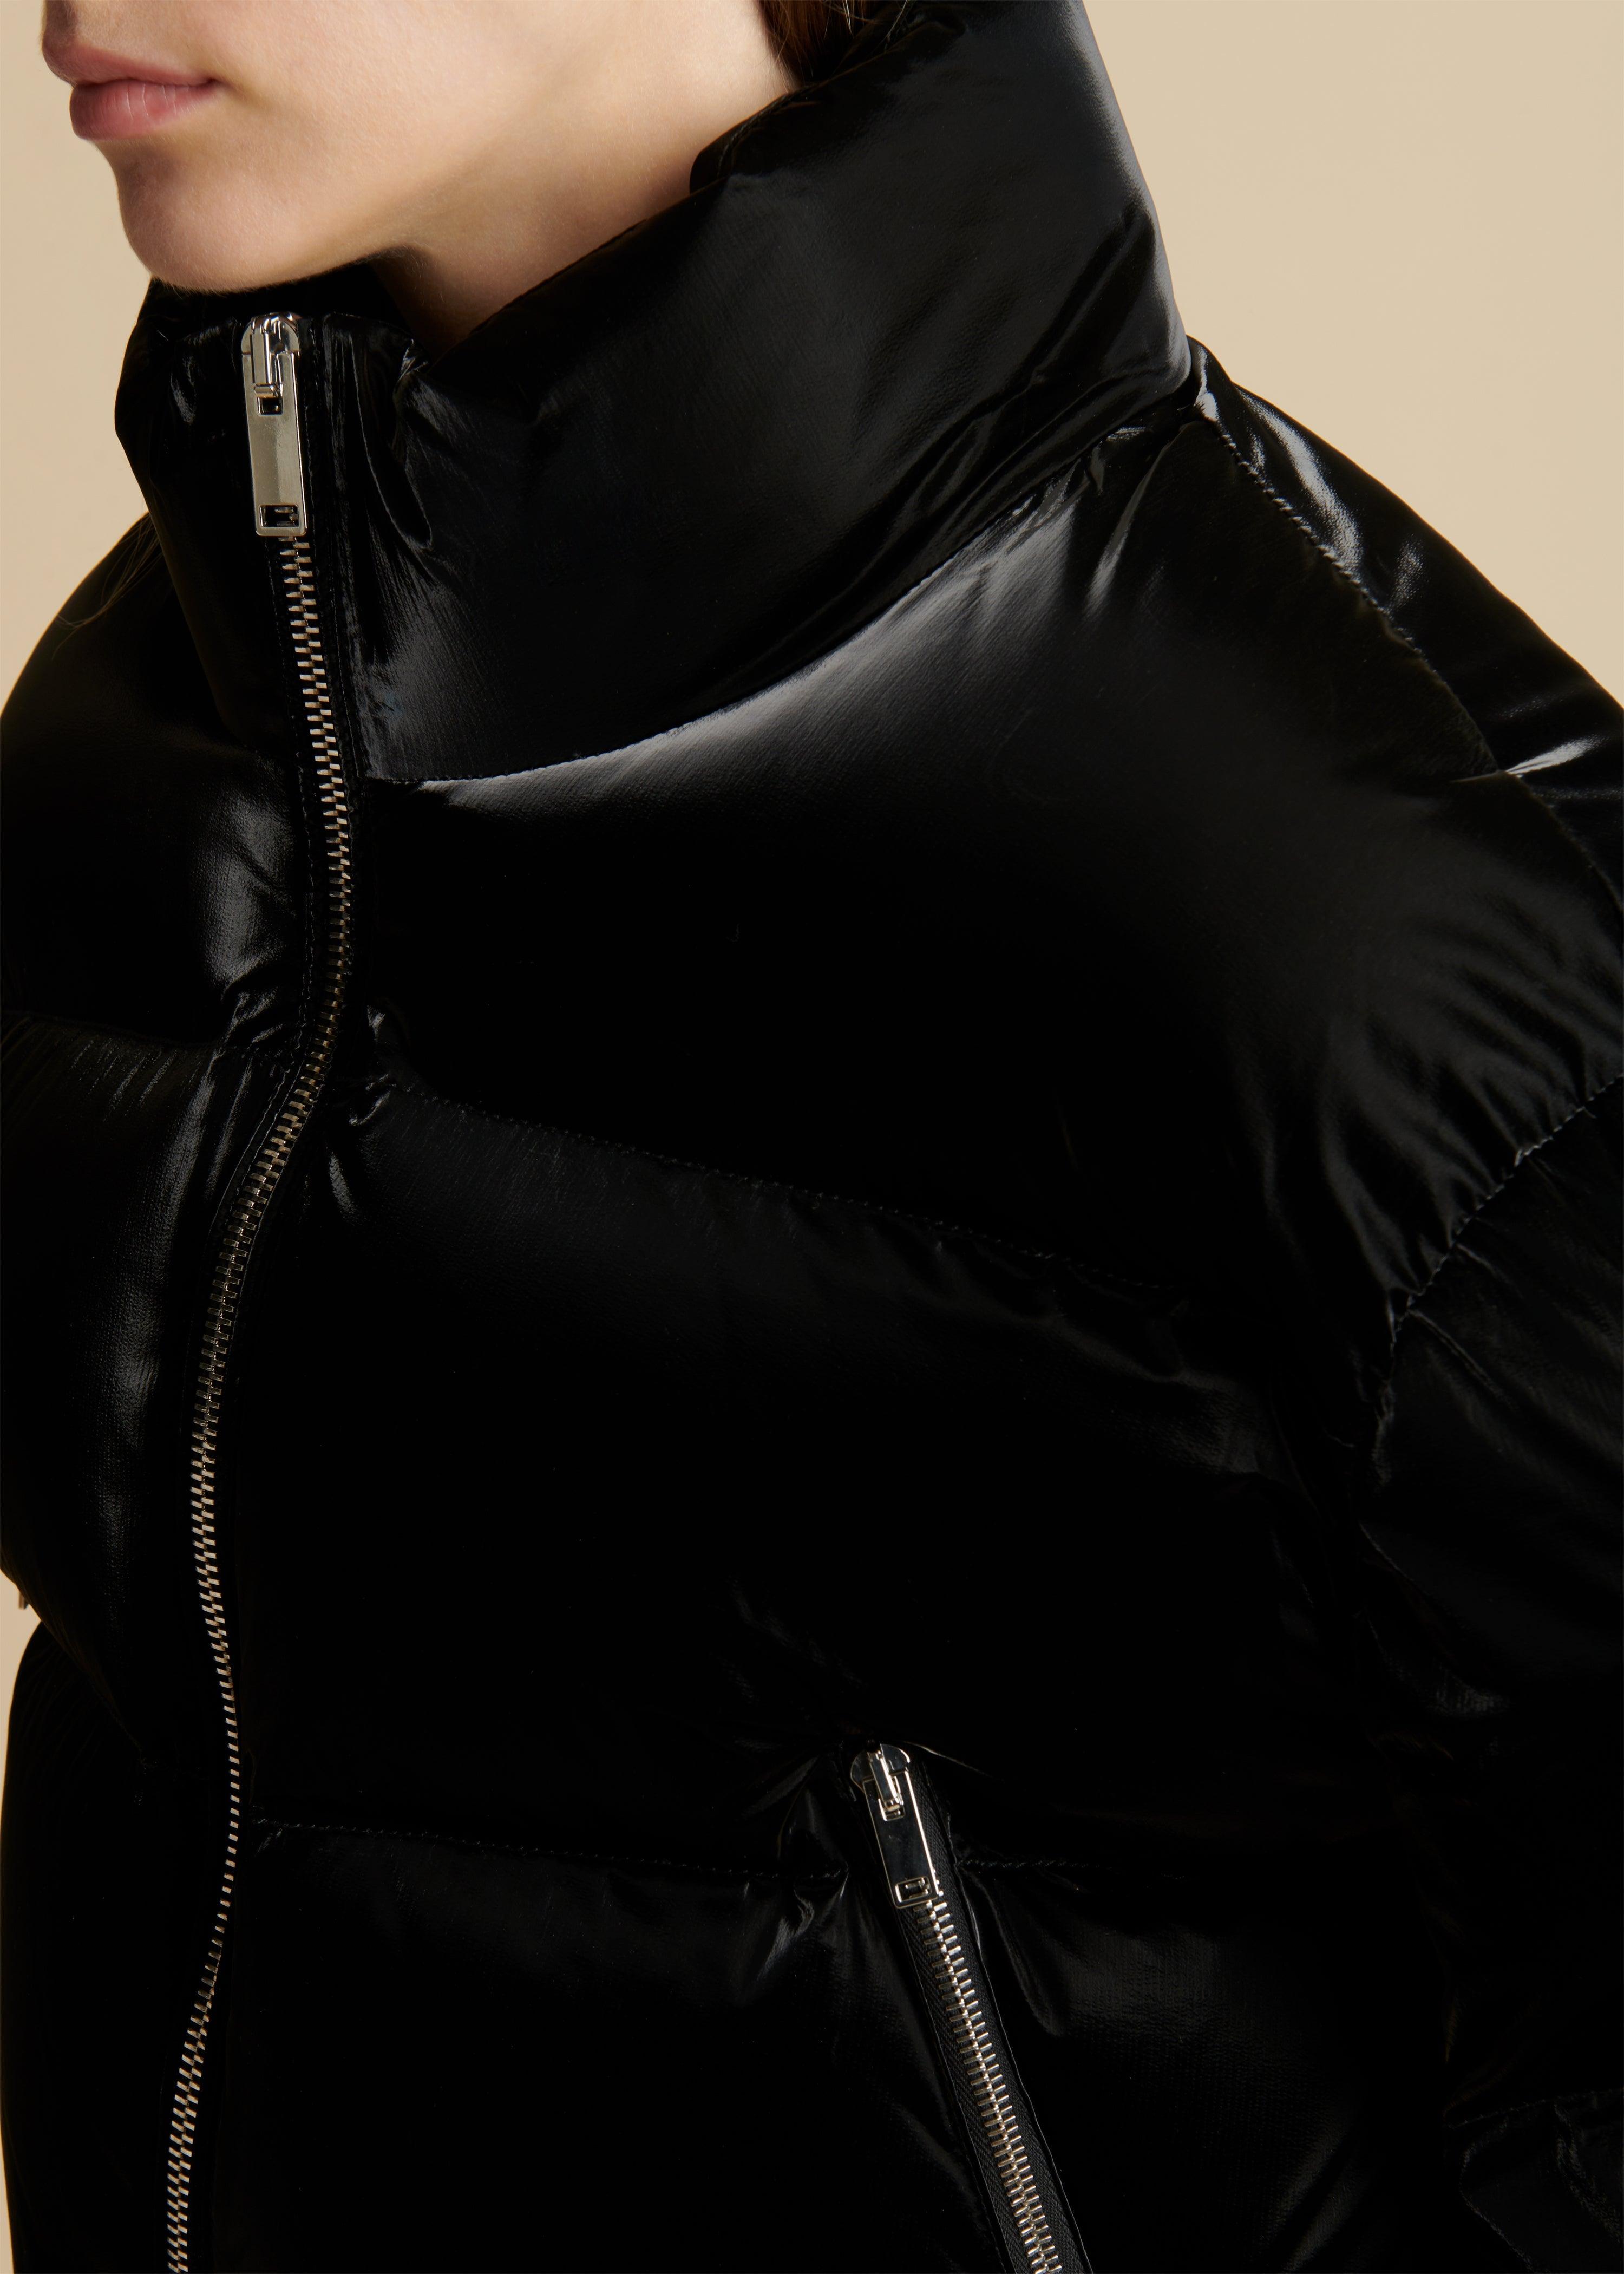 The Fulman Puffer Jacket in Black Liquid Nylon - The Iconic Issue